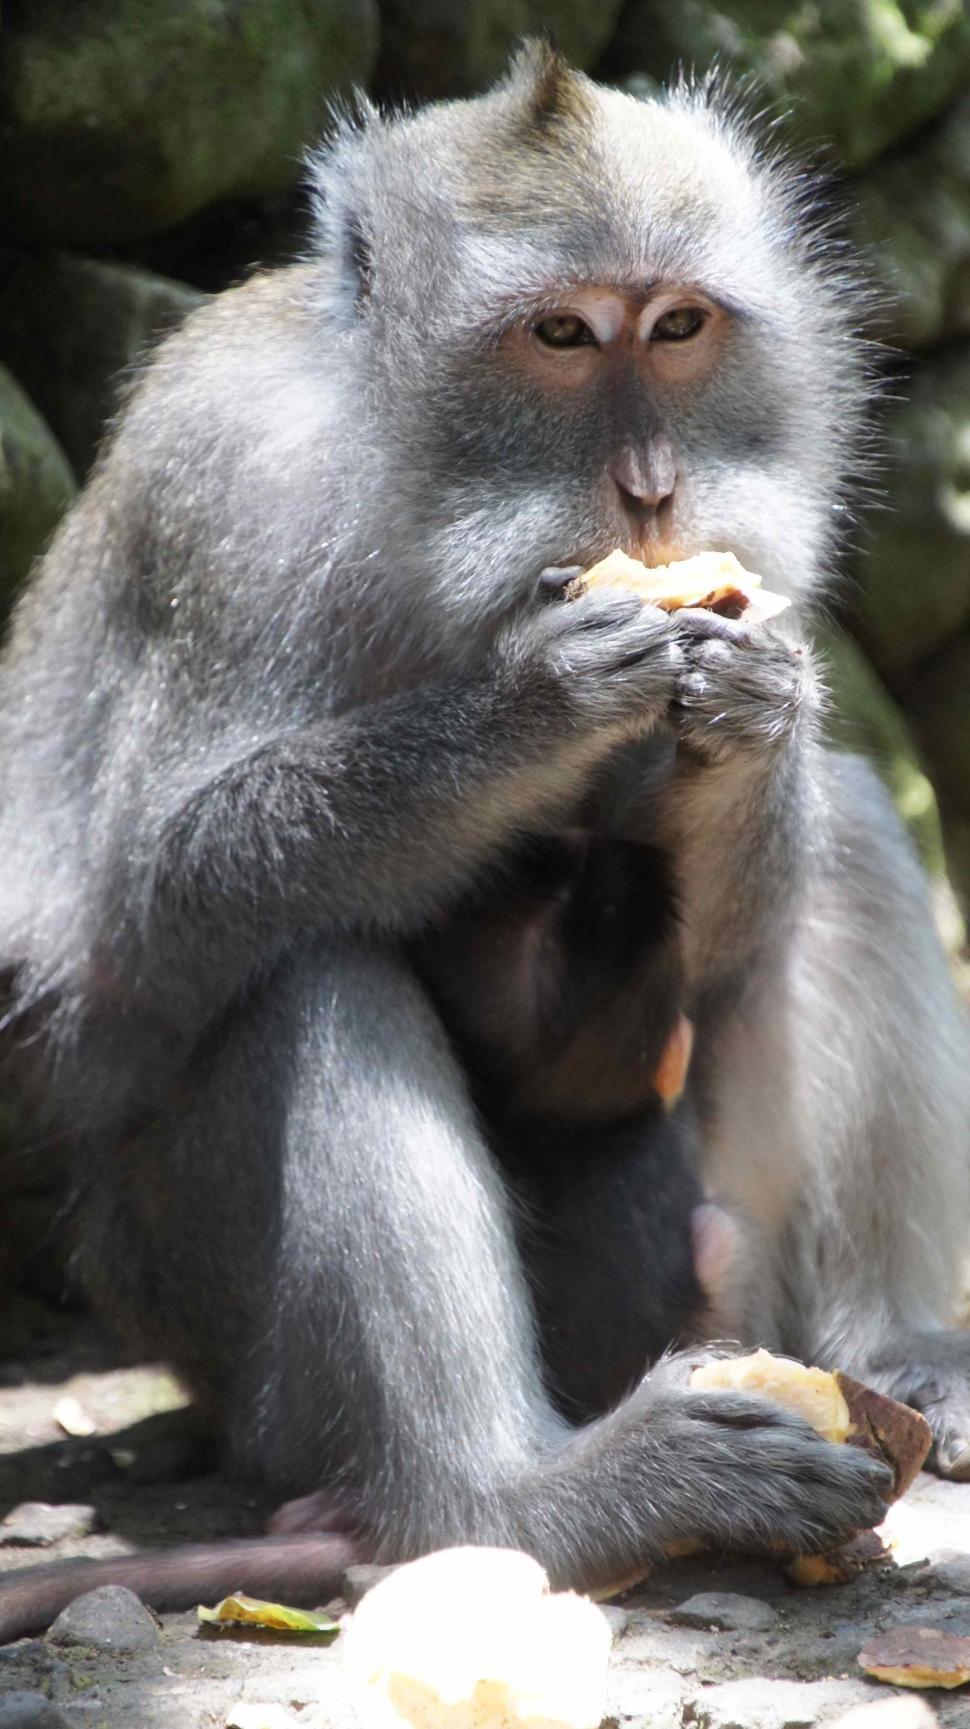 Free Image of Monkey Hanging Out Eating 